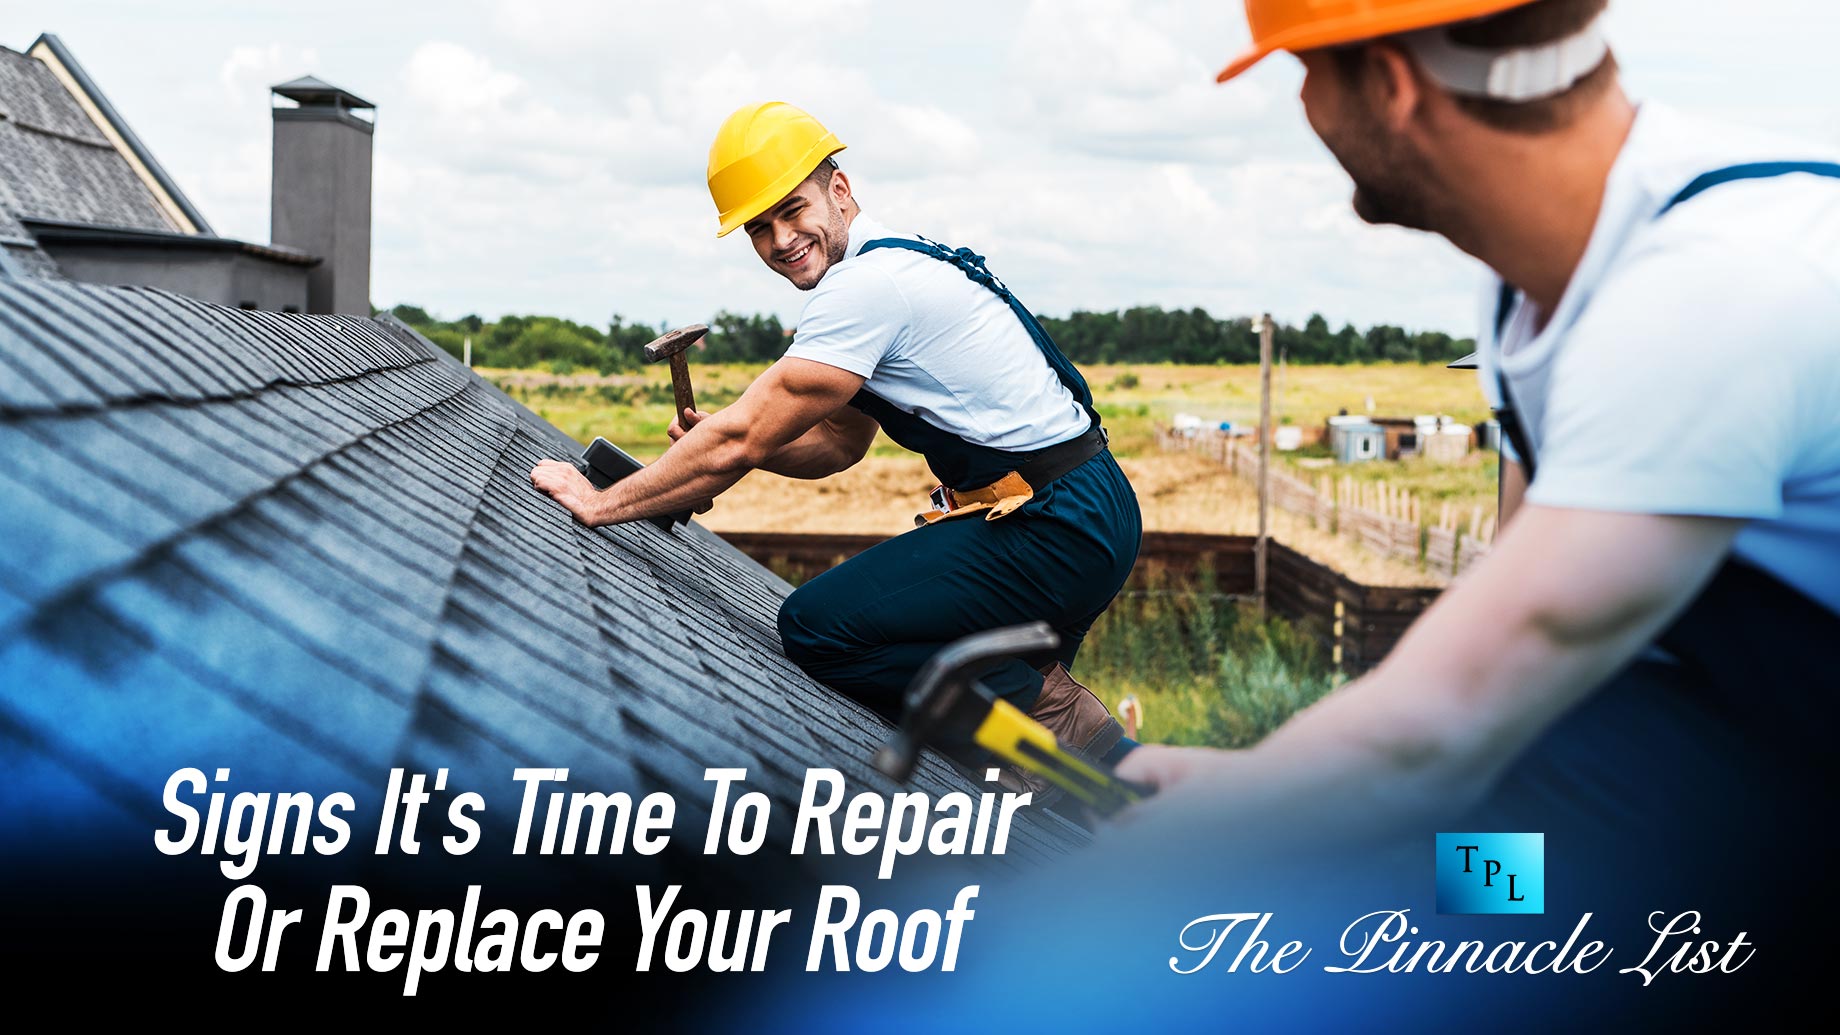 Signs It's Time To Repair Or Replace Your Roof